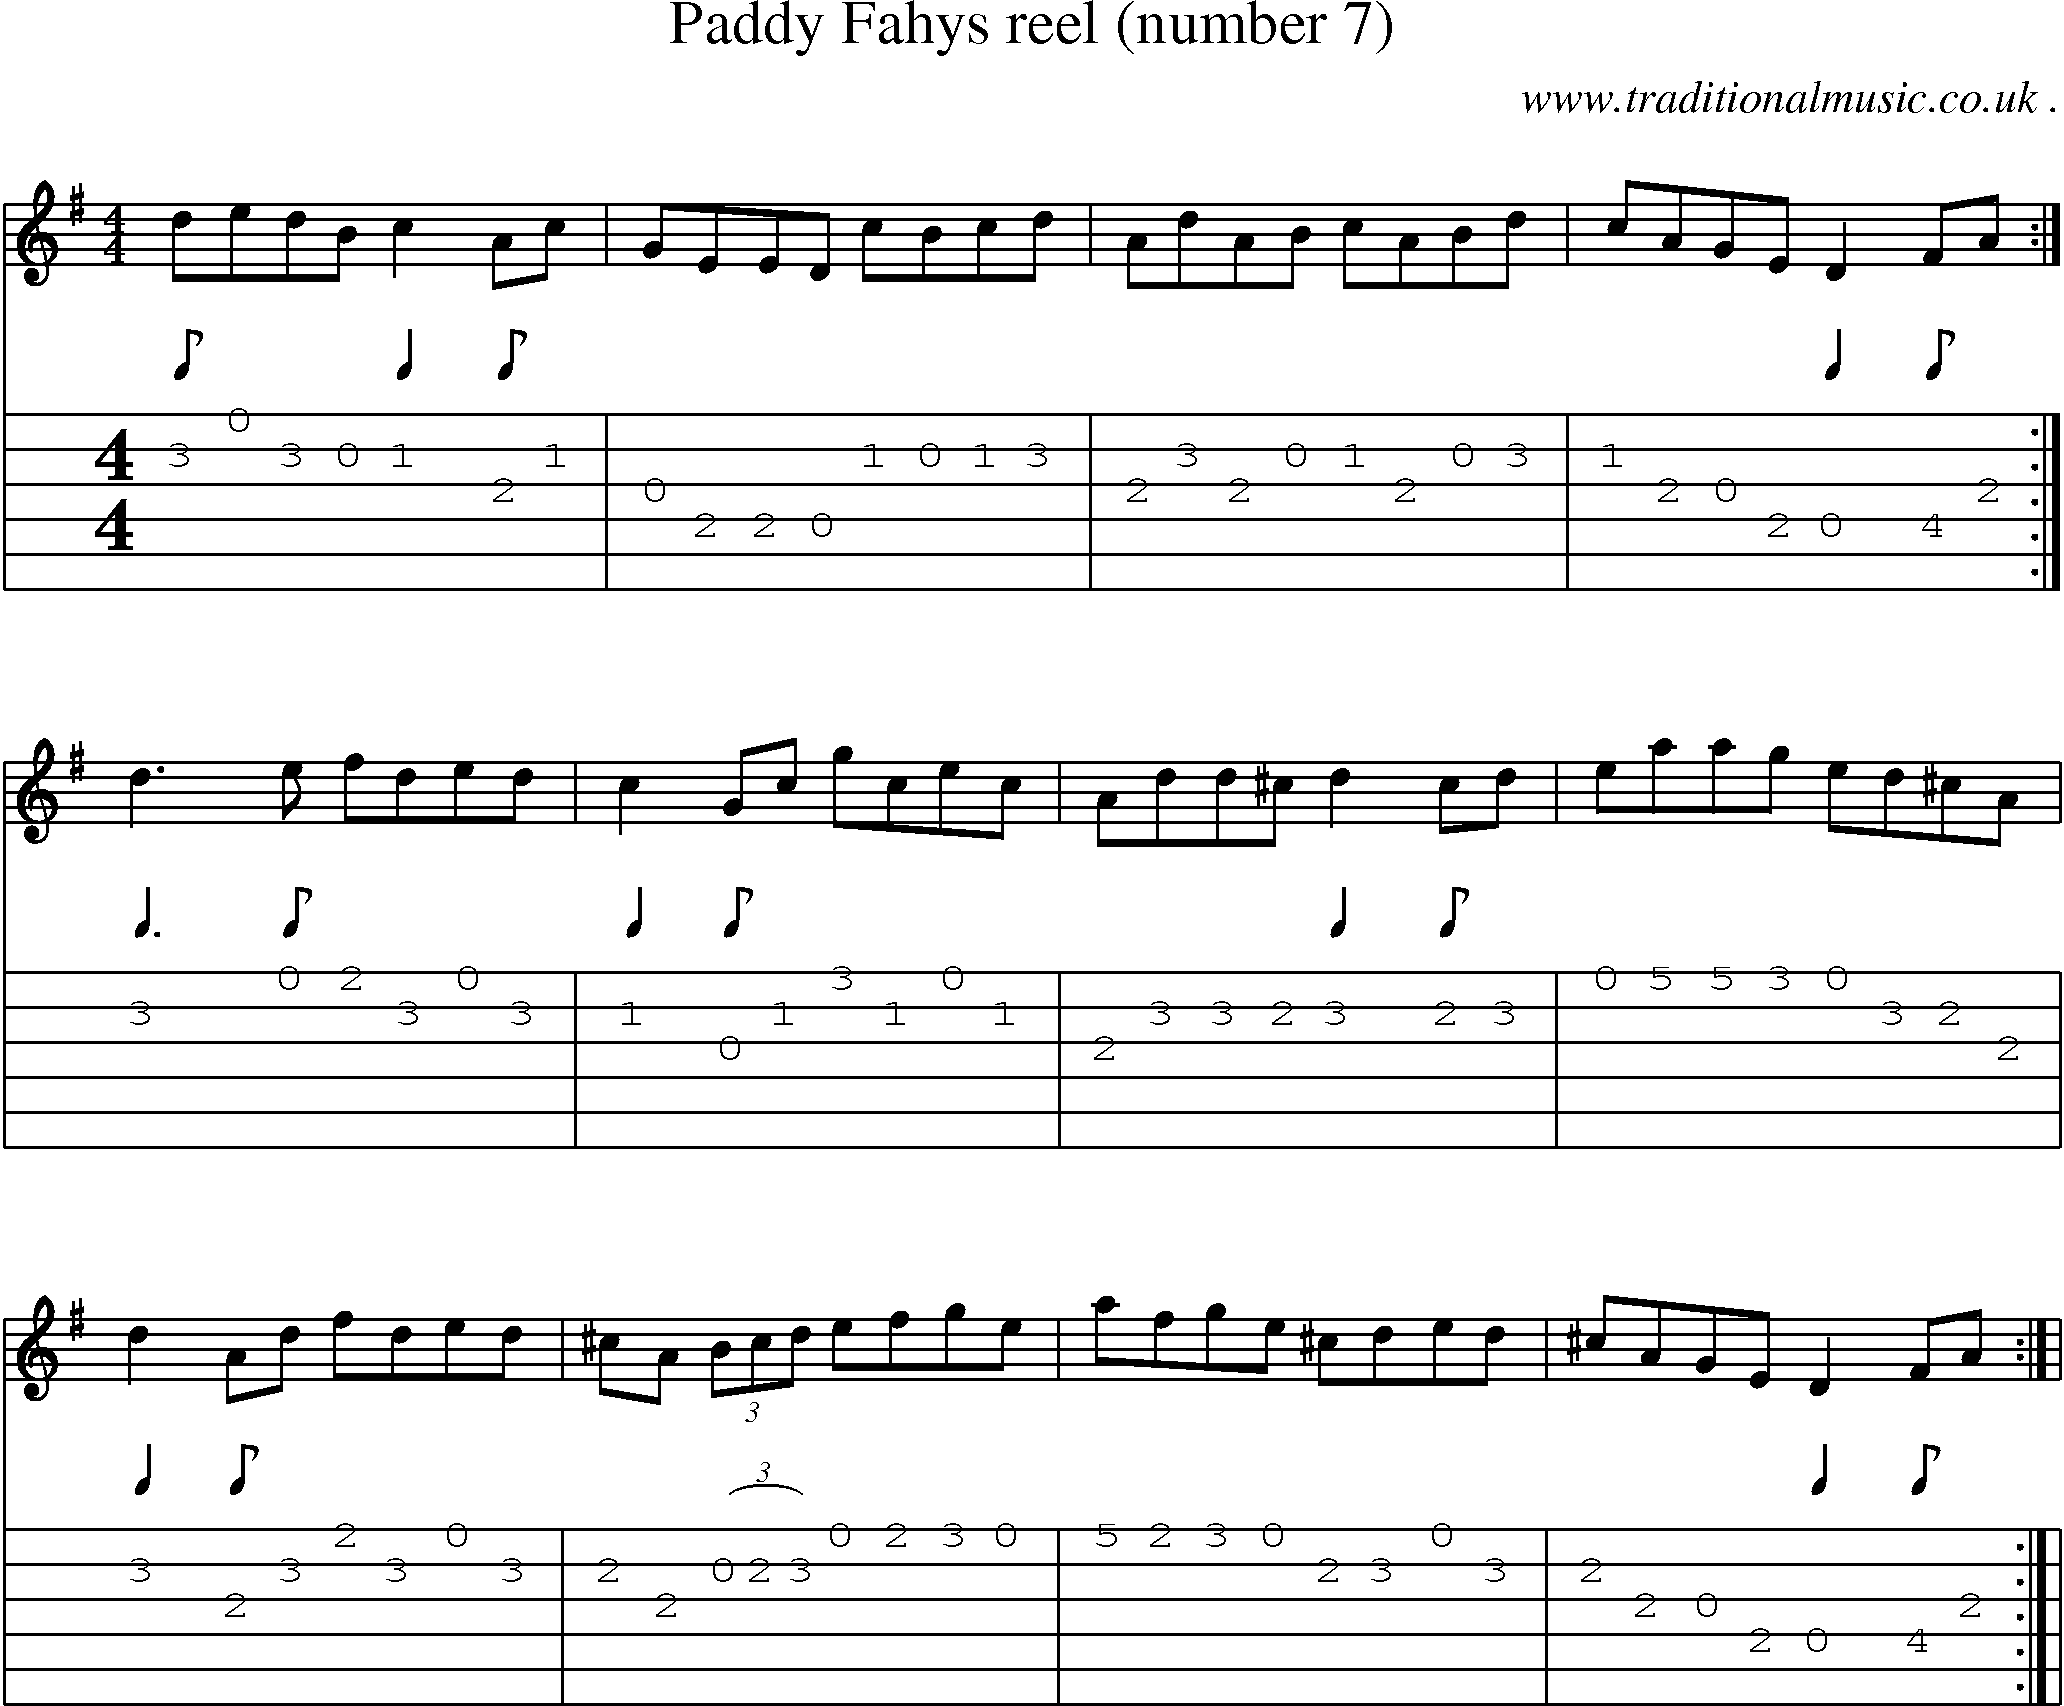 Sheet-Music and Guitar Tabs for Paddy Fahys Reel (number 7)